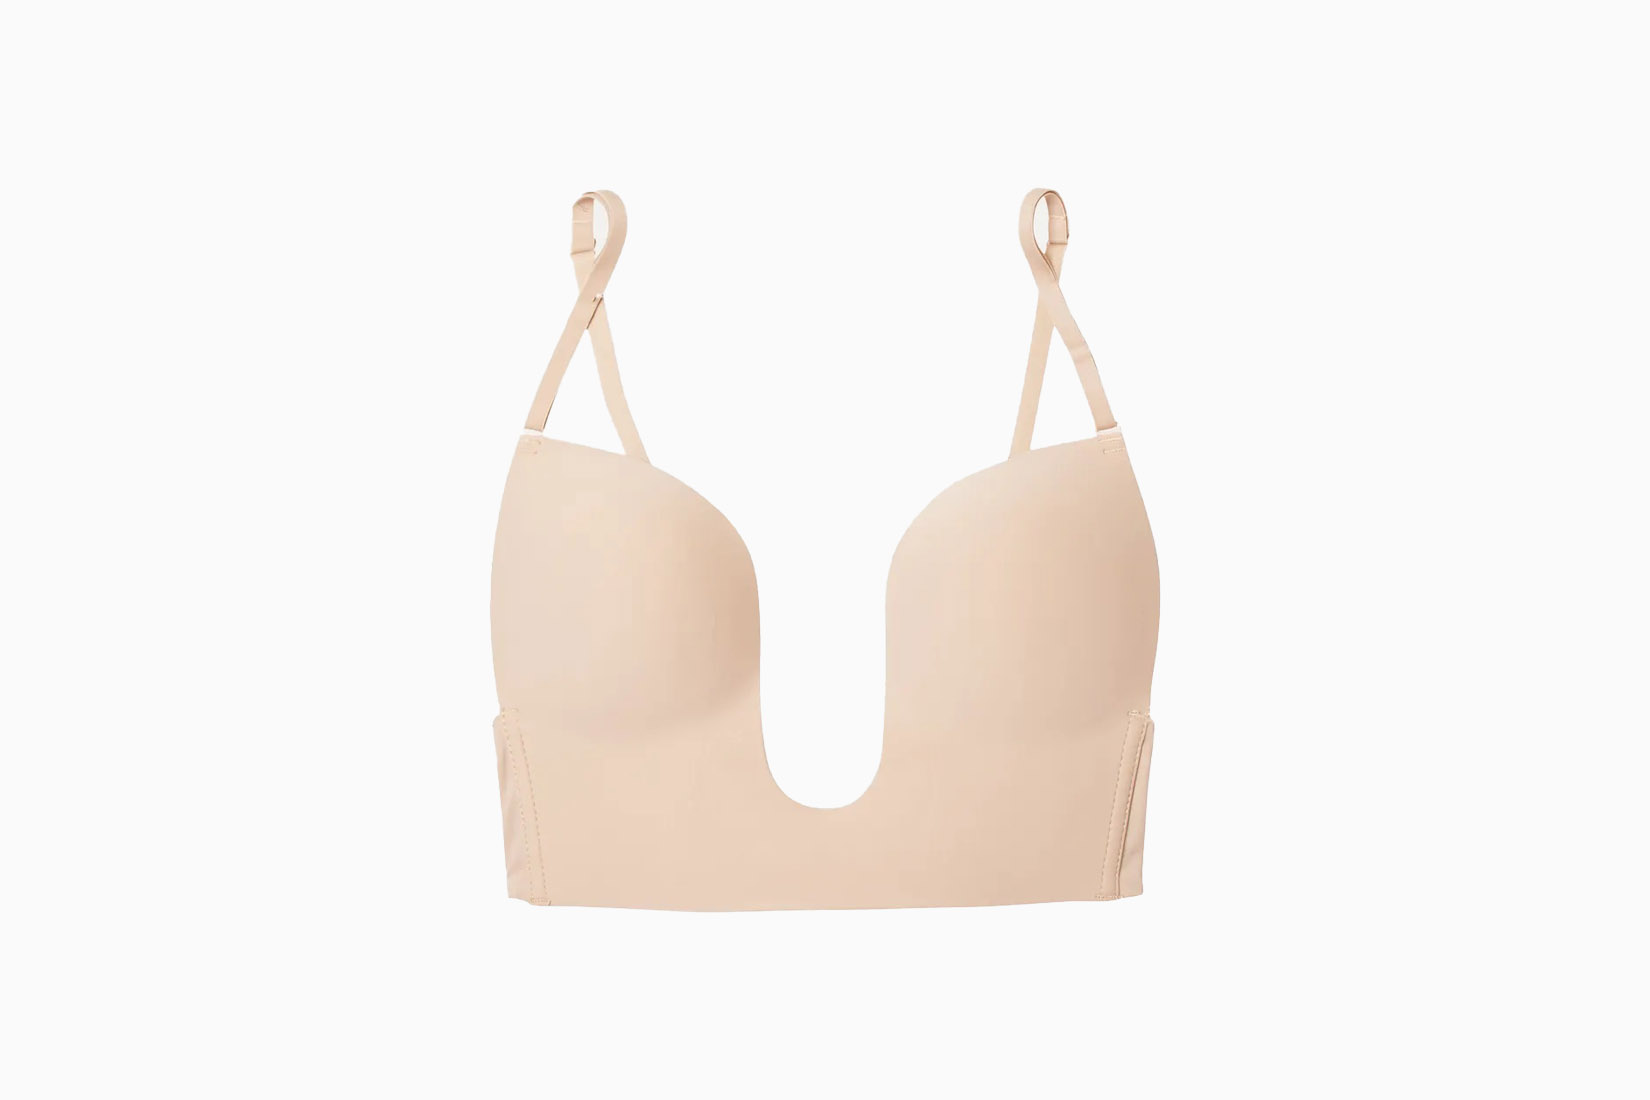 23 Most Comfortable Bras For Comfort, Support & Style (2022)